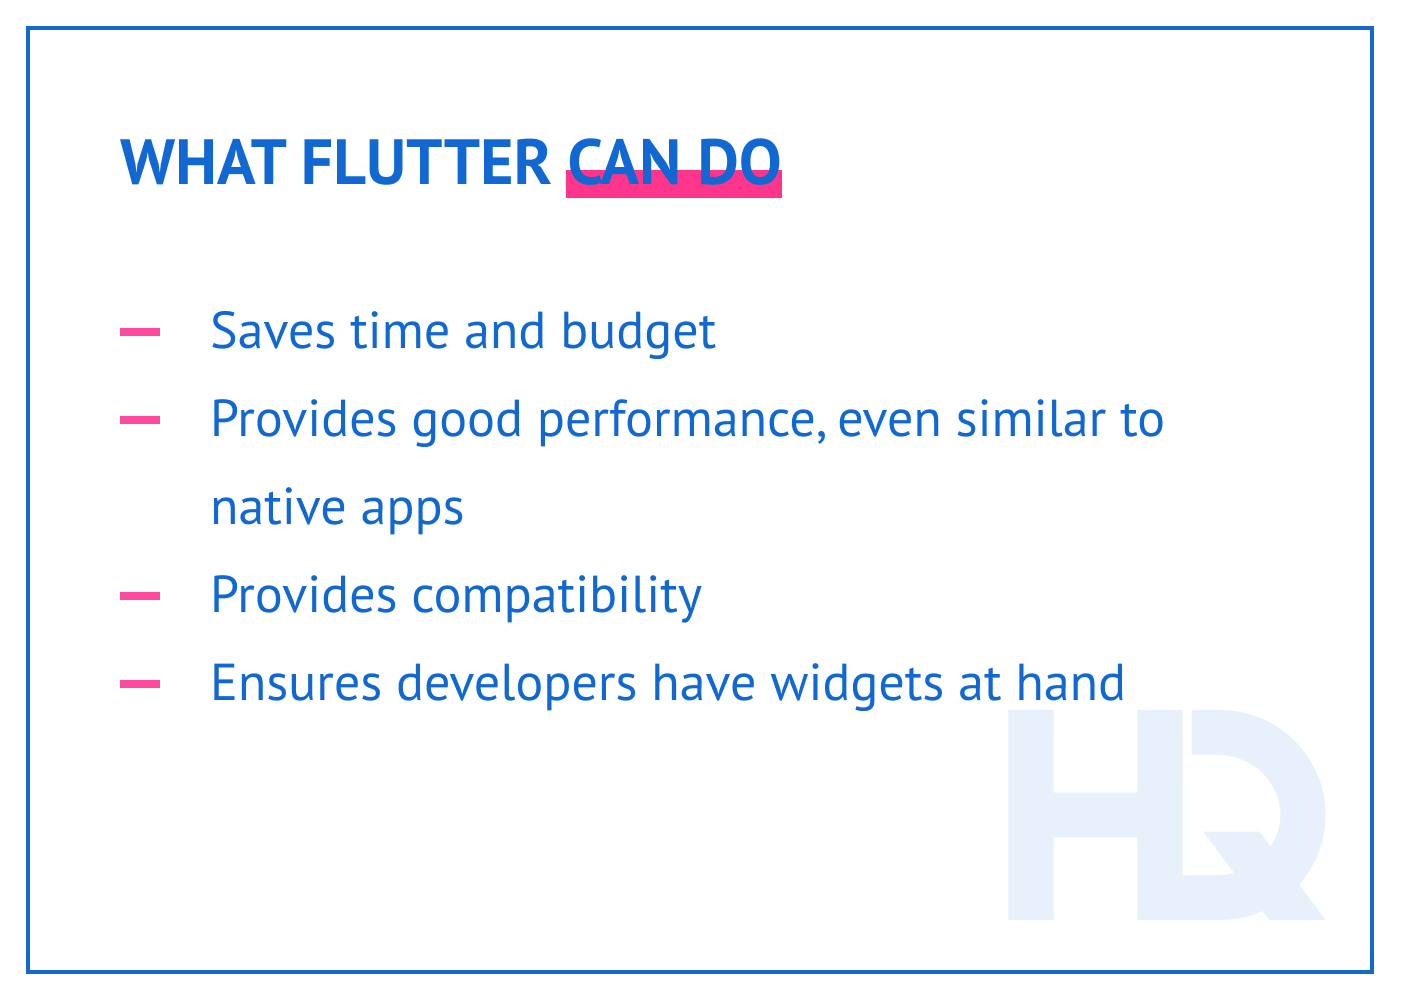 What Flutter can do, its benefits.